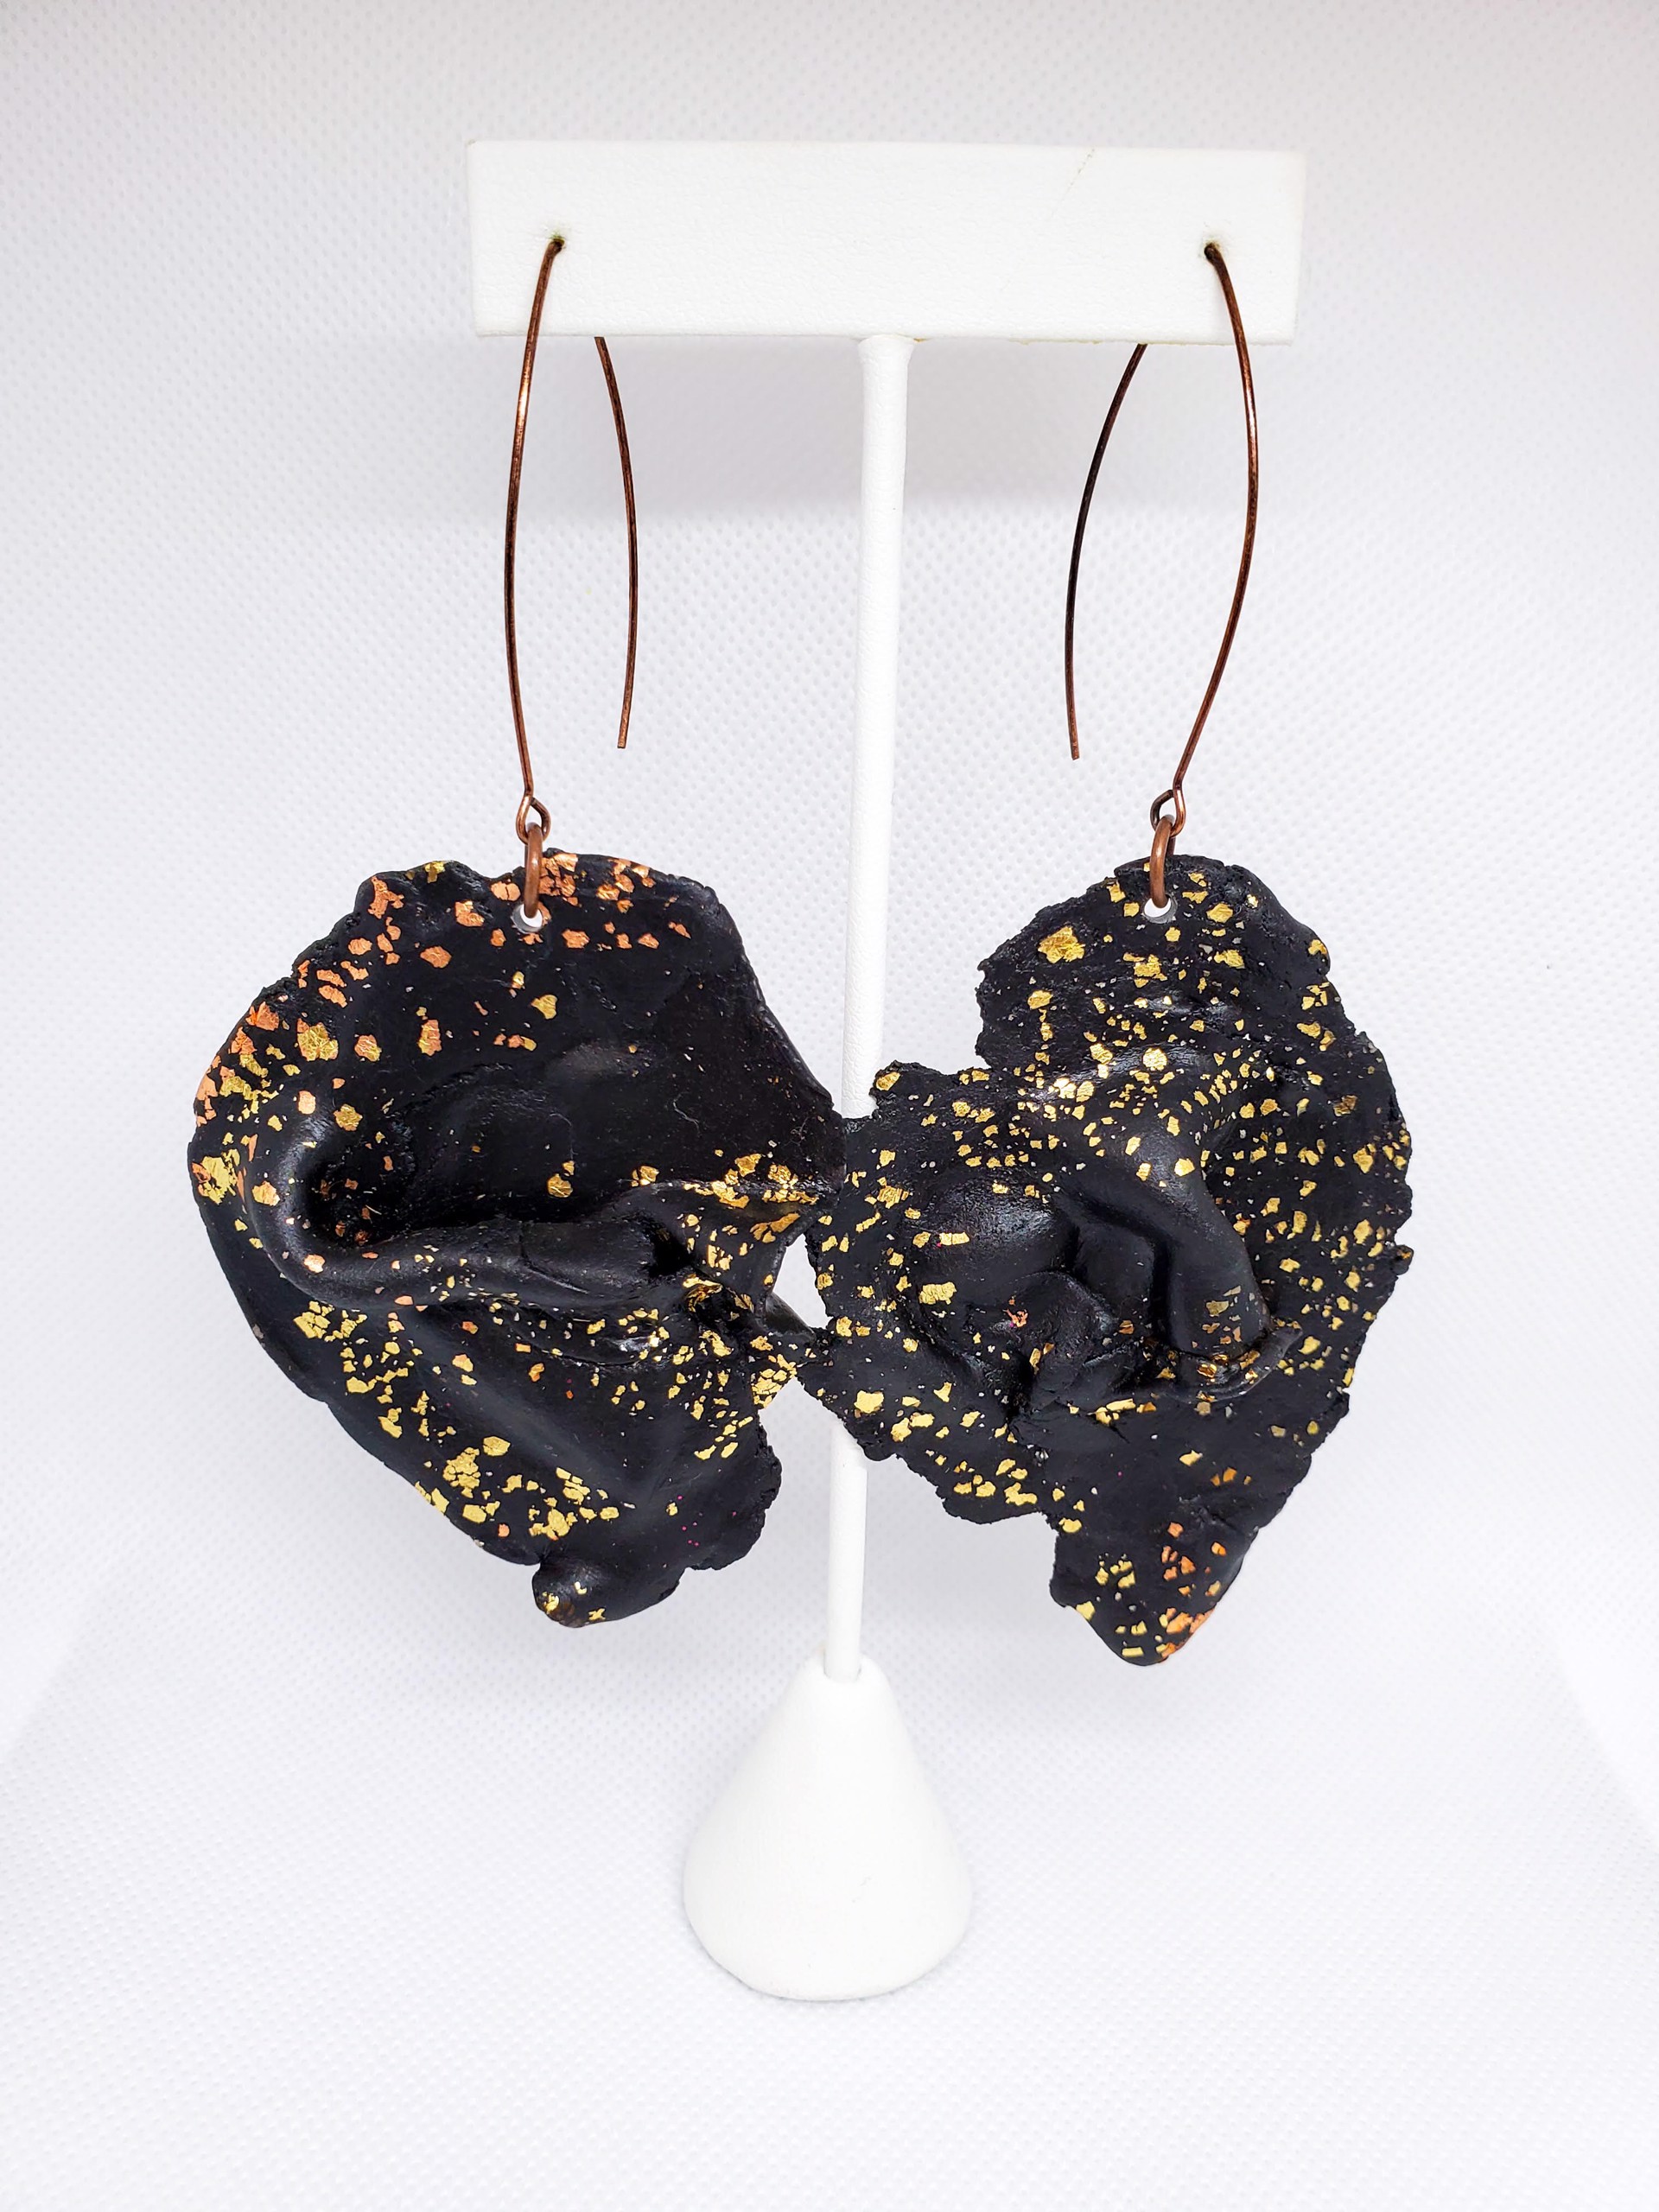 Black and Gold Epoxy Earrings by Sally Bass